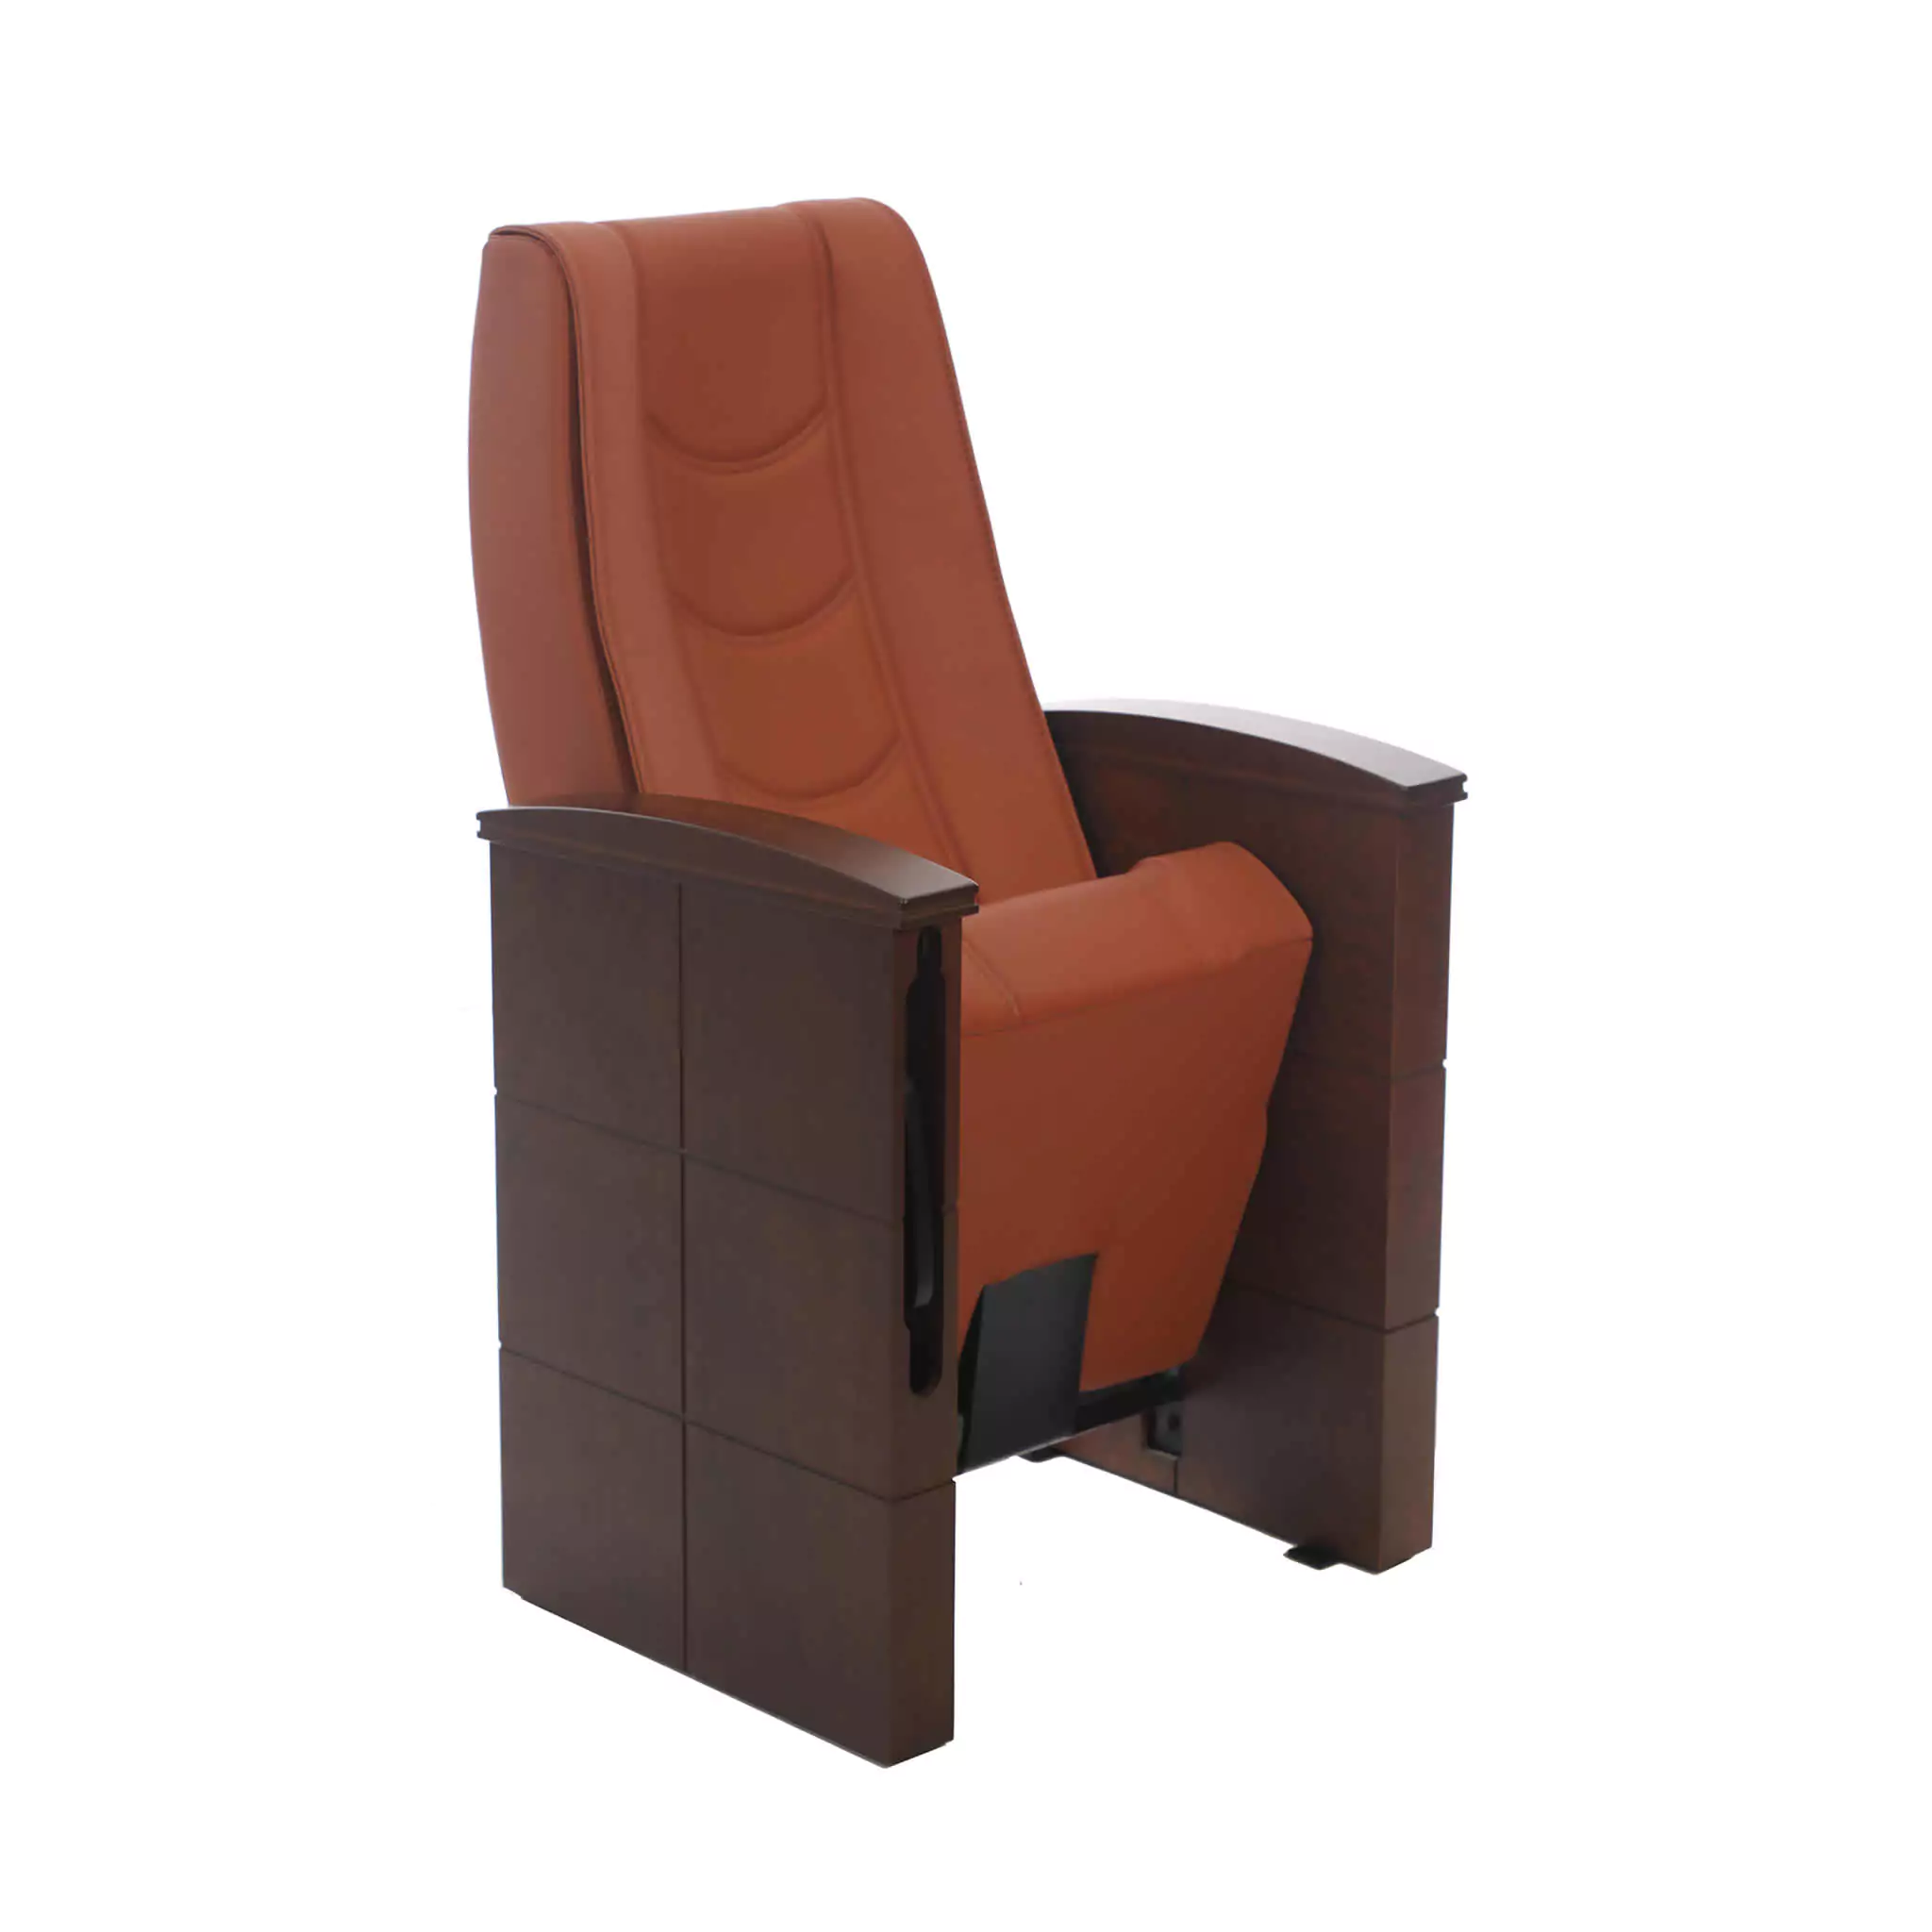 Simko Seating Product Conference Seat Obsidian